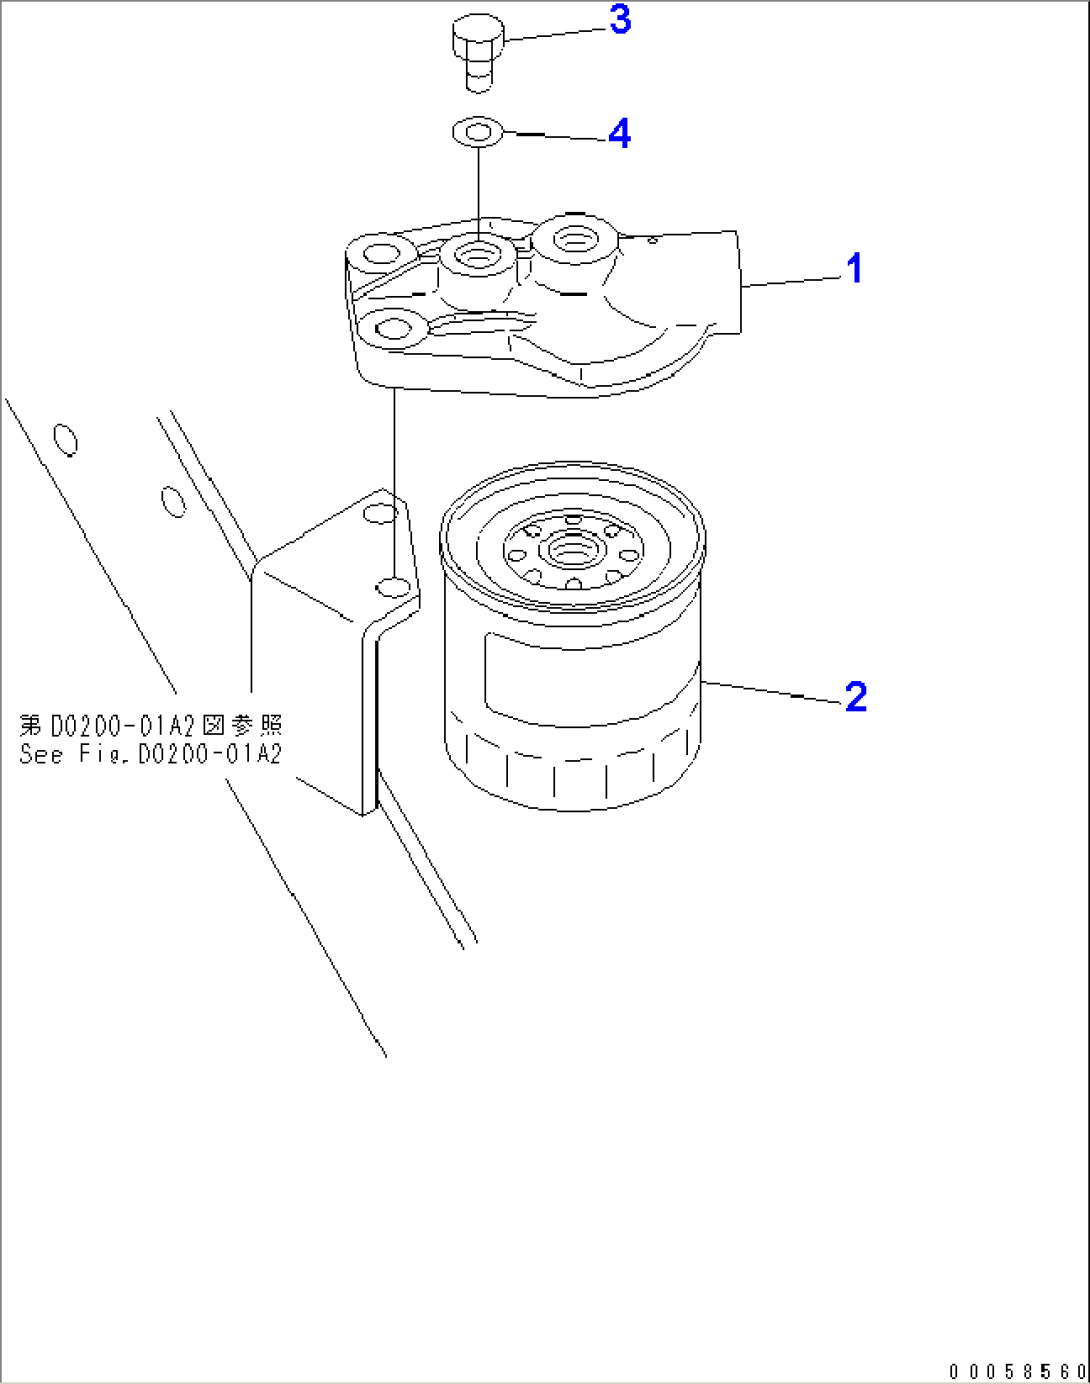 ADDITIONAL FUEL FILTER